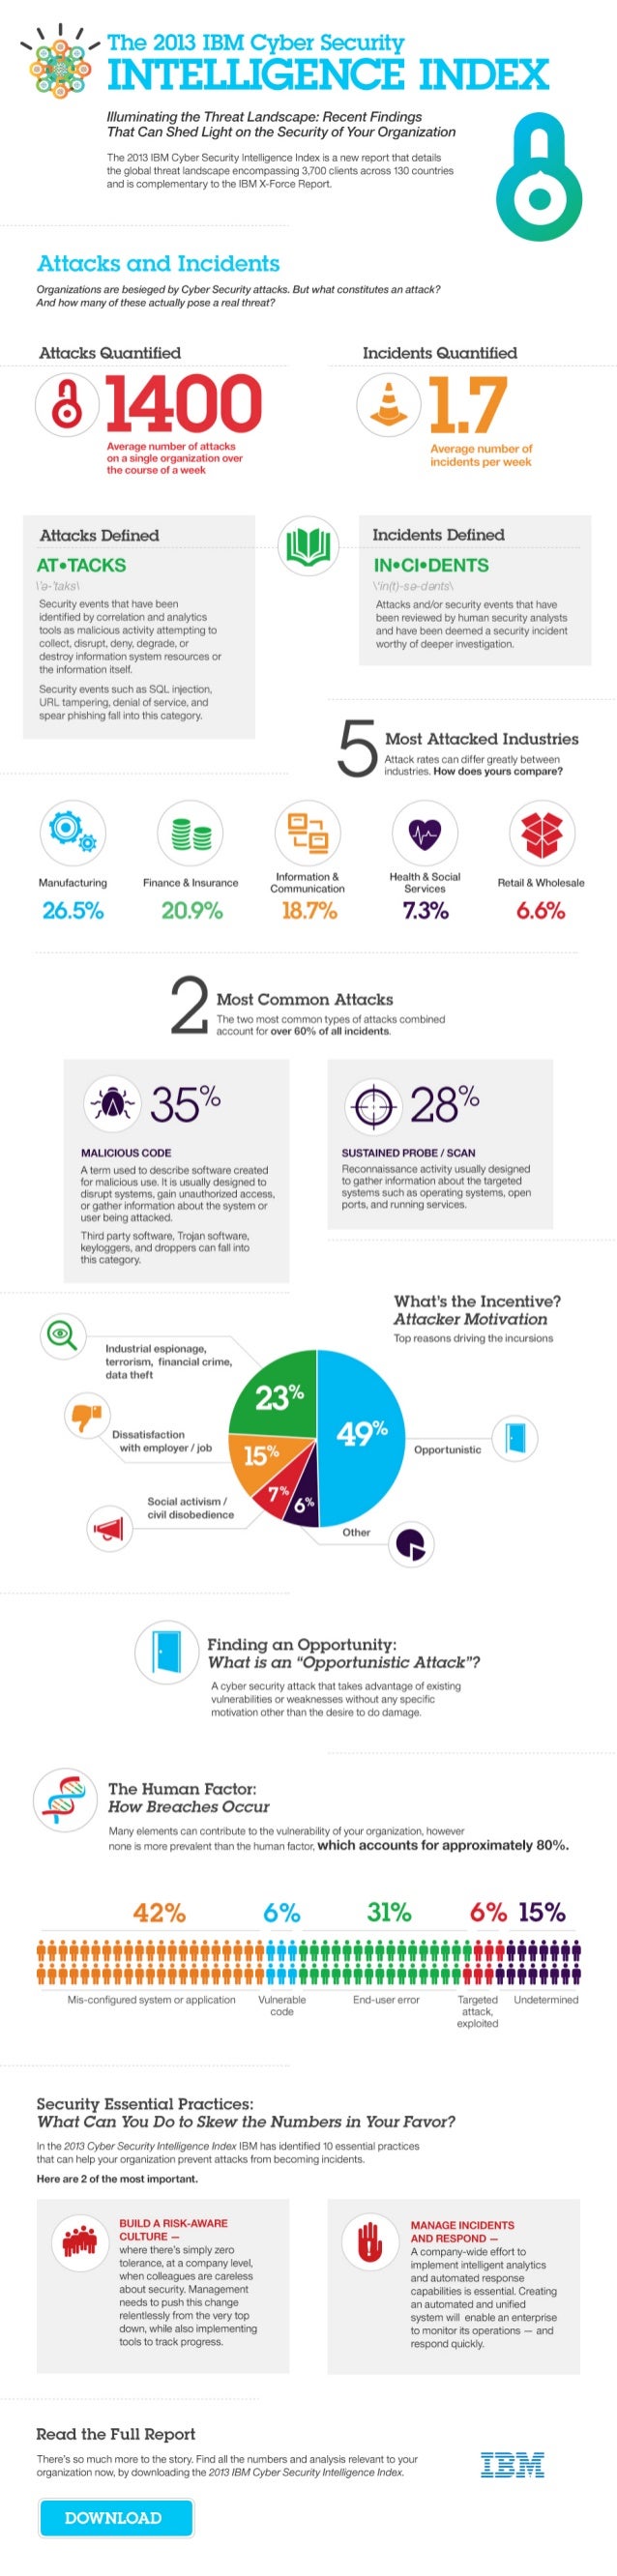 2013-ibm-cyber-security-intelligence-index-infographic